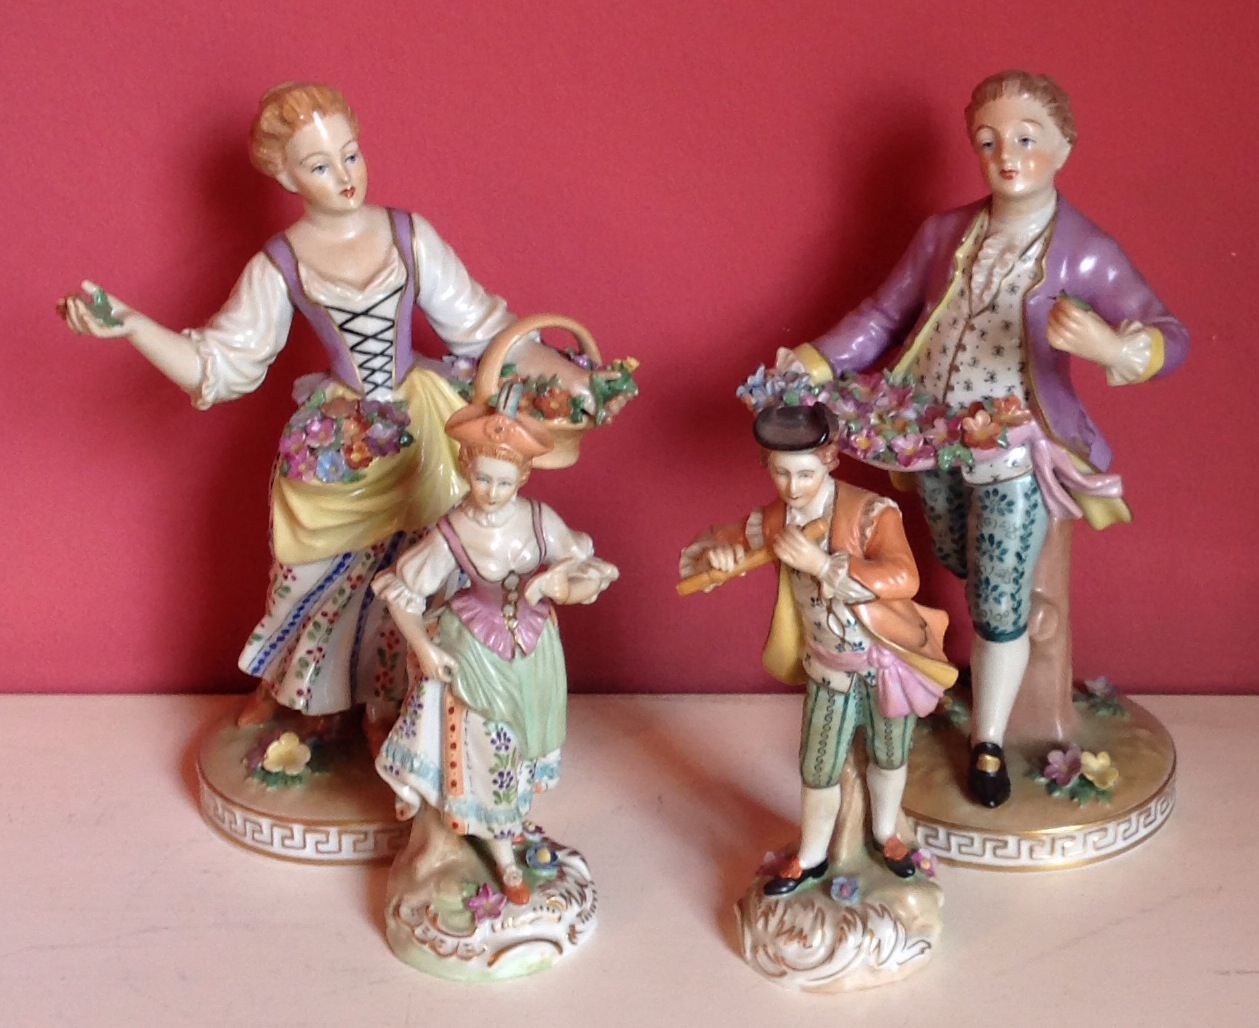 A PAIR OF DRESDEN FIGURES OF FLOWER SELLERS Along with another pair, musicians.